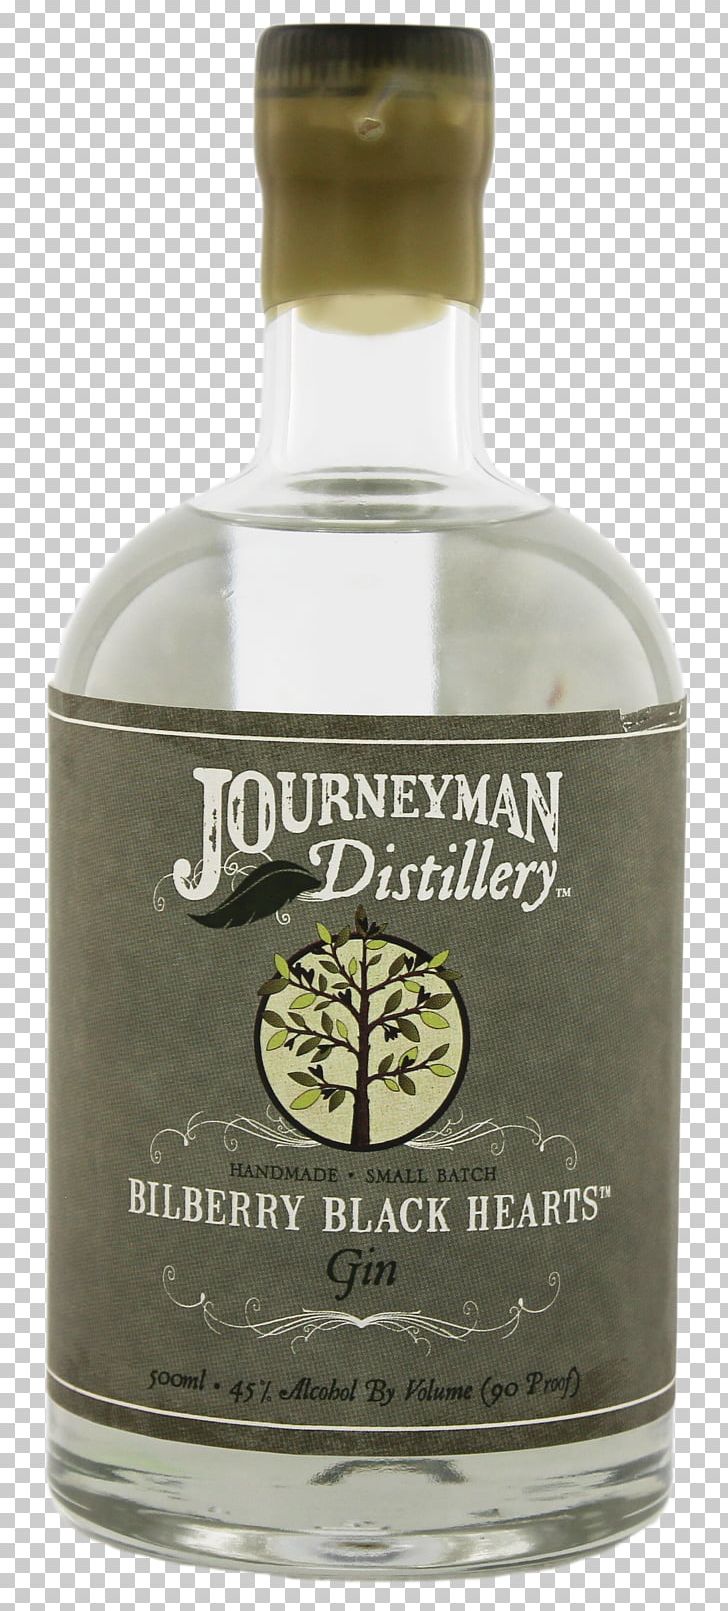 Liqueur Journeyman Distillery Journeyman Bilberry Black Hearts Aged Gin 0 PNG, Clipart, Alcoholic Beverage, Bilberry, Bottle, Distilled Beverage, Drink Free PNG Download